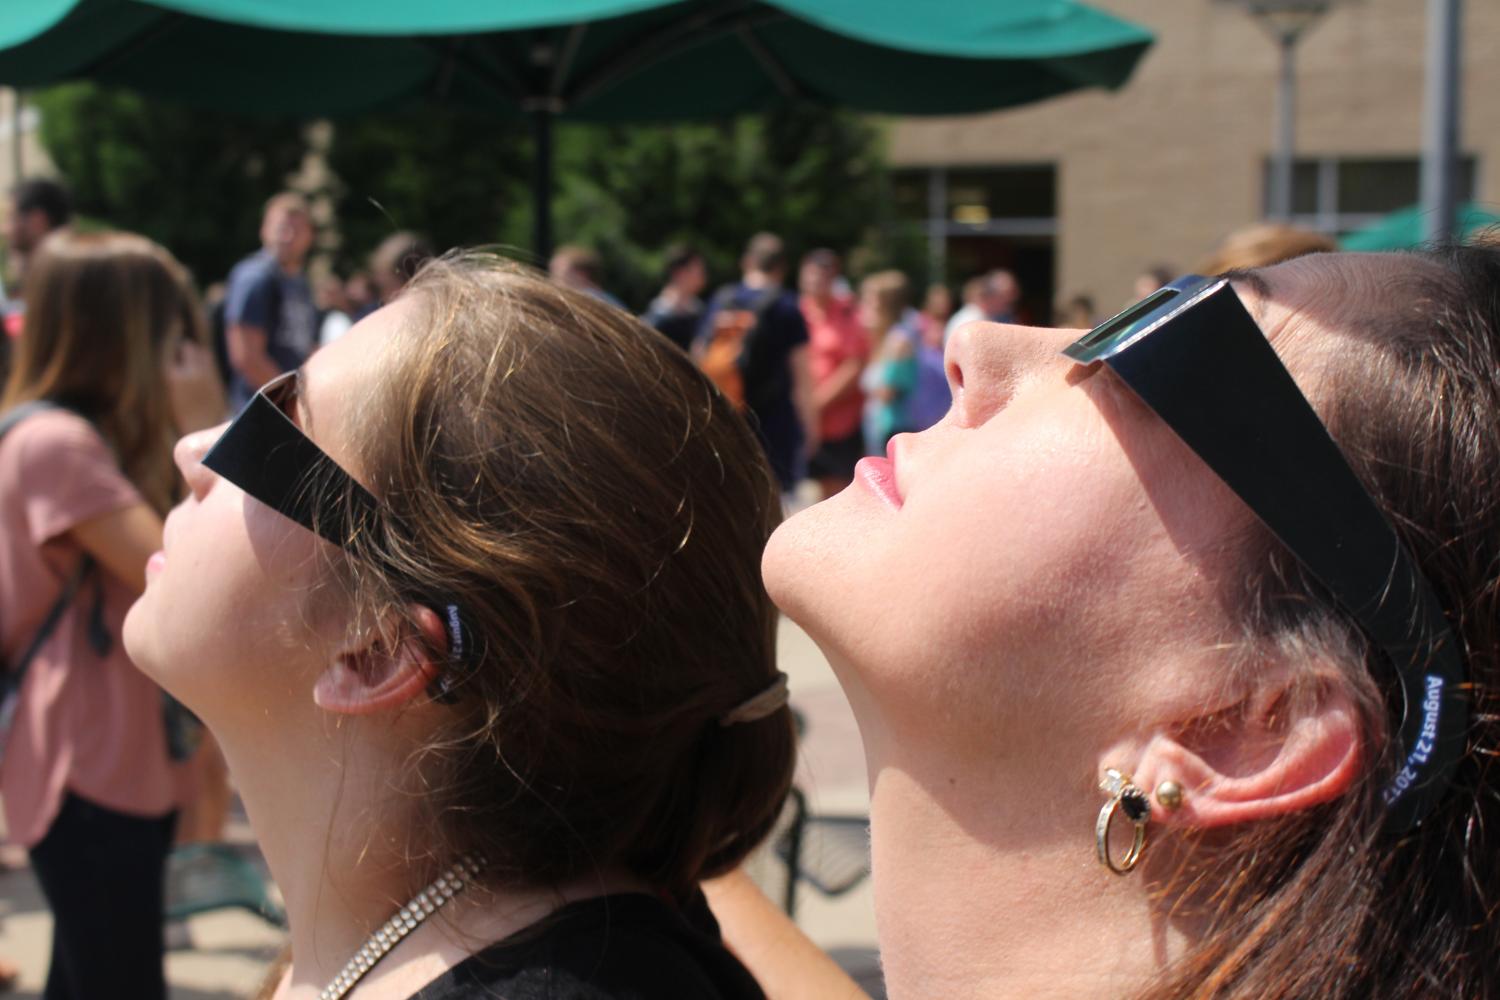 Solar eclipse draws thousands to campus